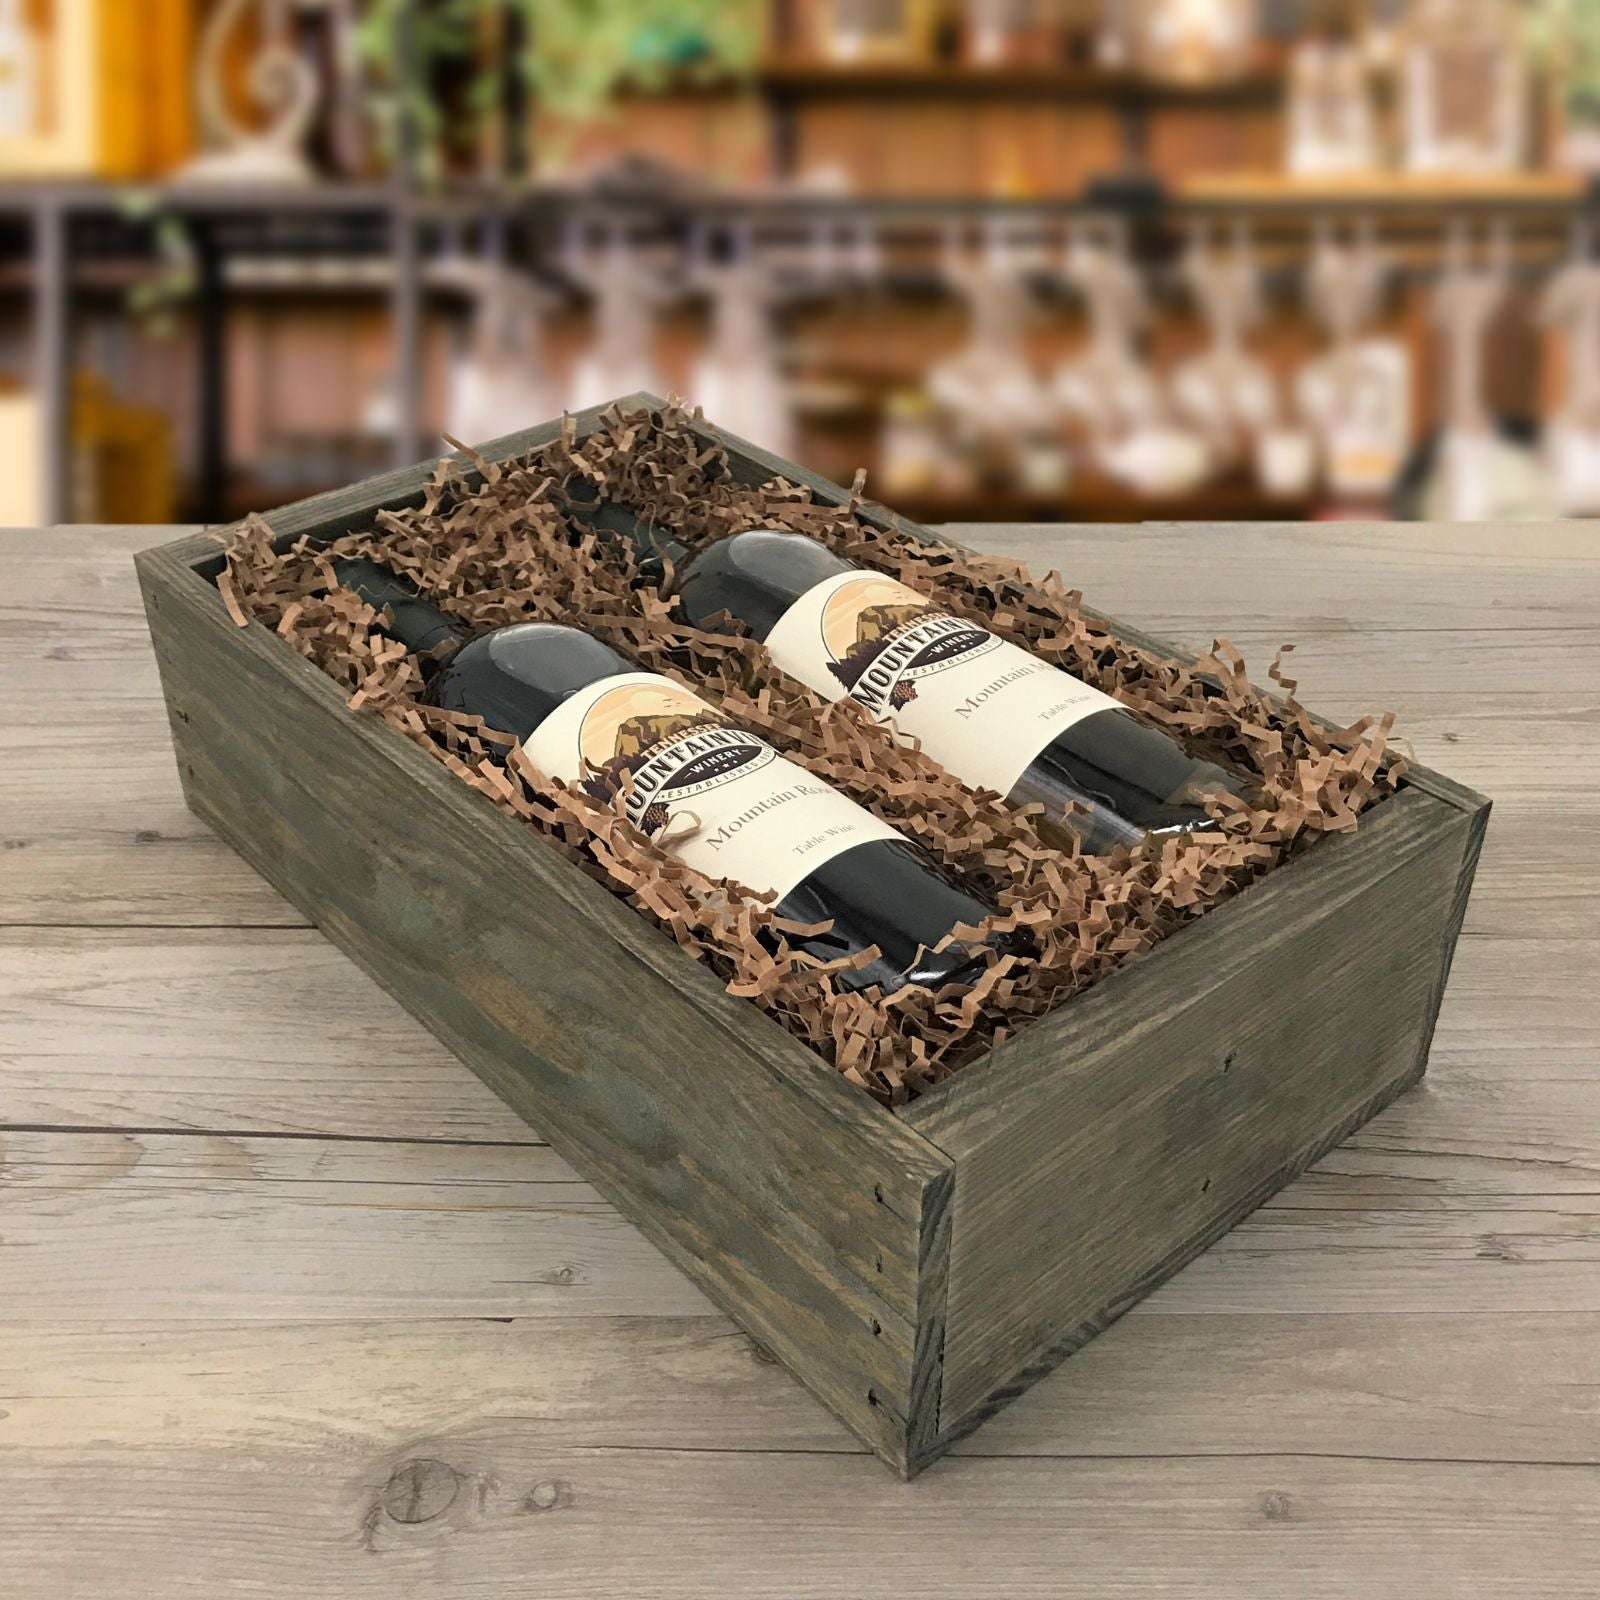 Wine bottle gift set in a wooden crate by Carpenter Core